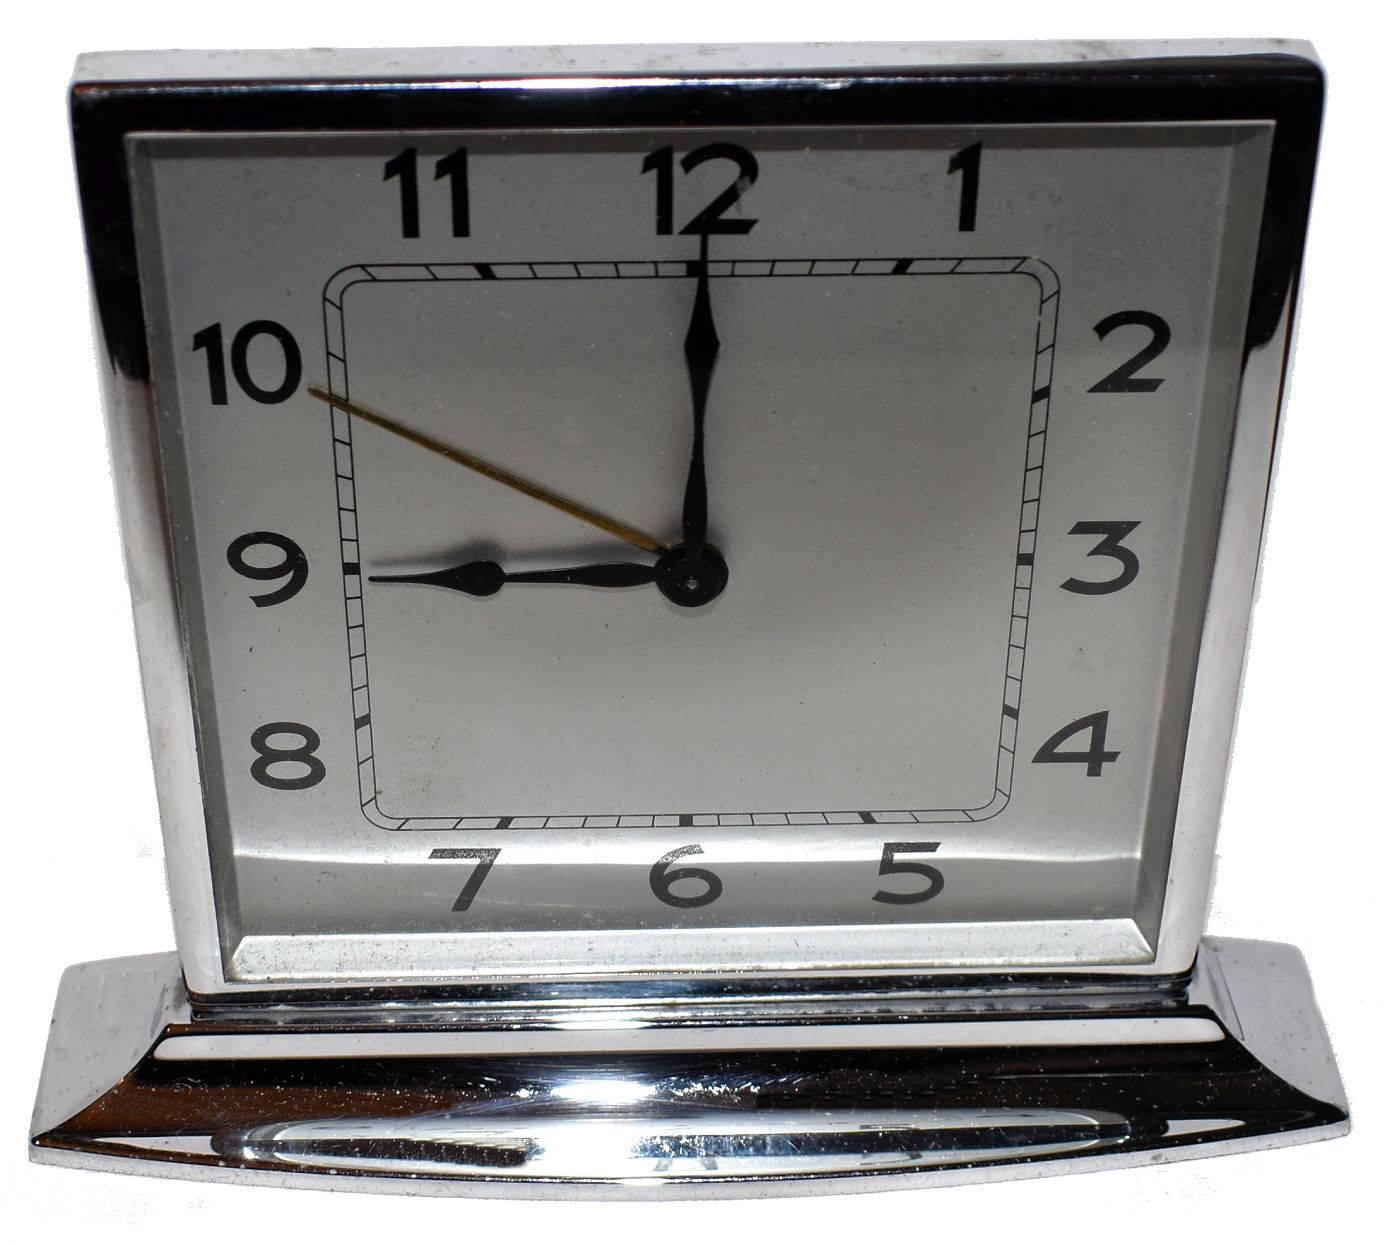 There's no makers name but we sourced this clock in France on one of our trips so we think it's likely it originates from there. It's in remarkable condition for its 90 odd years, the chrome is as bright and crisp as when first made and the dial is